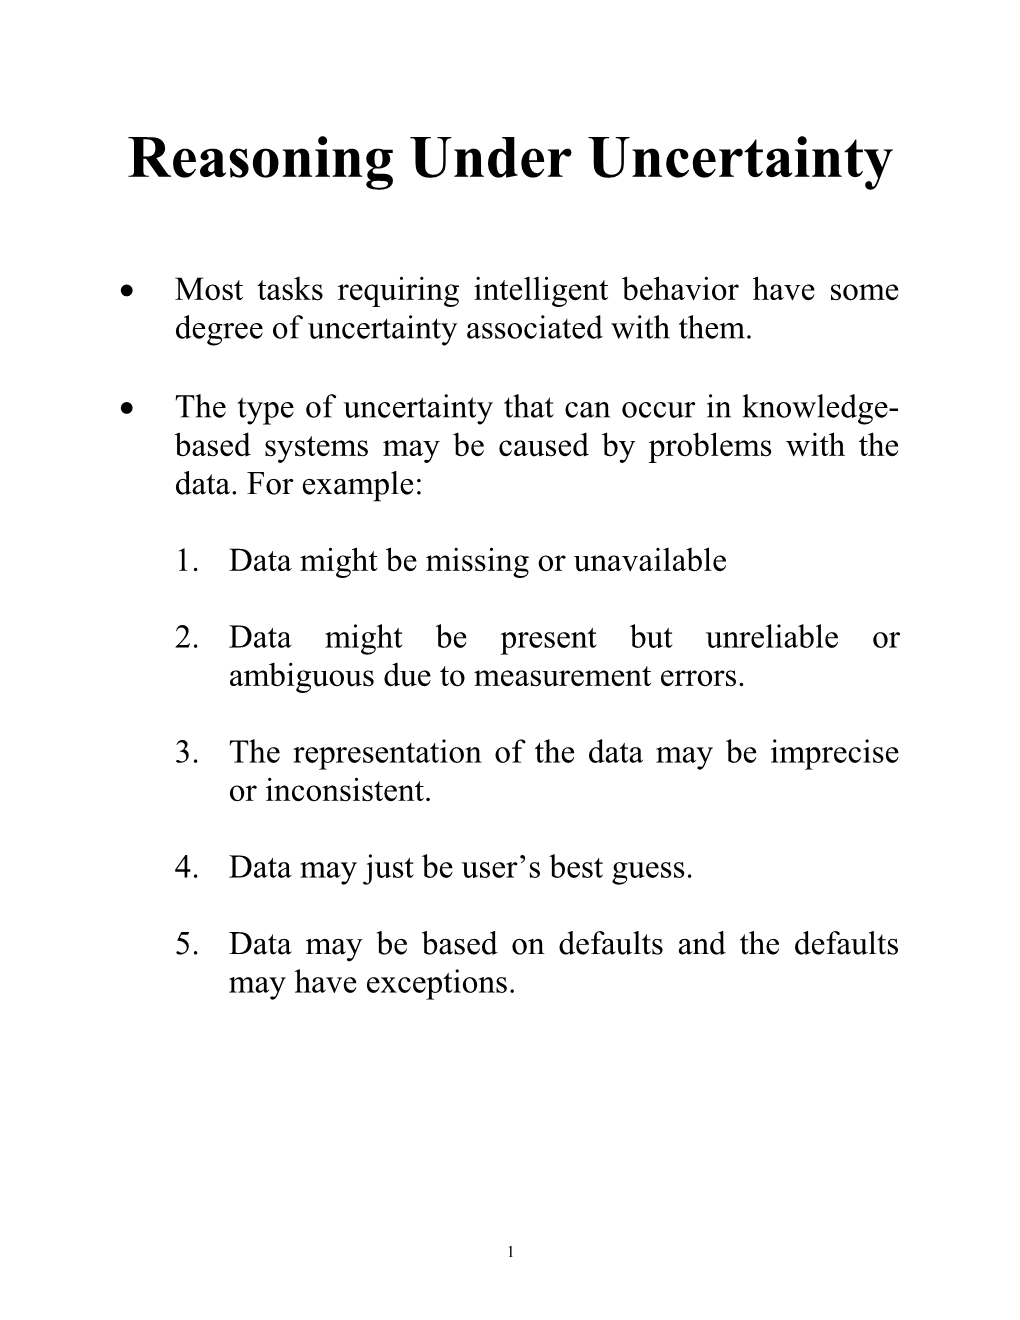 Chapter 4. Reasoning Under Uncertainty